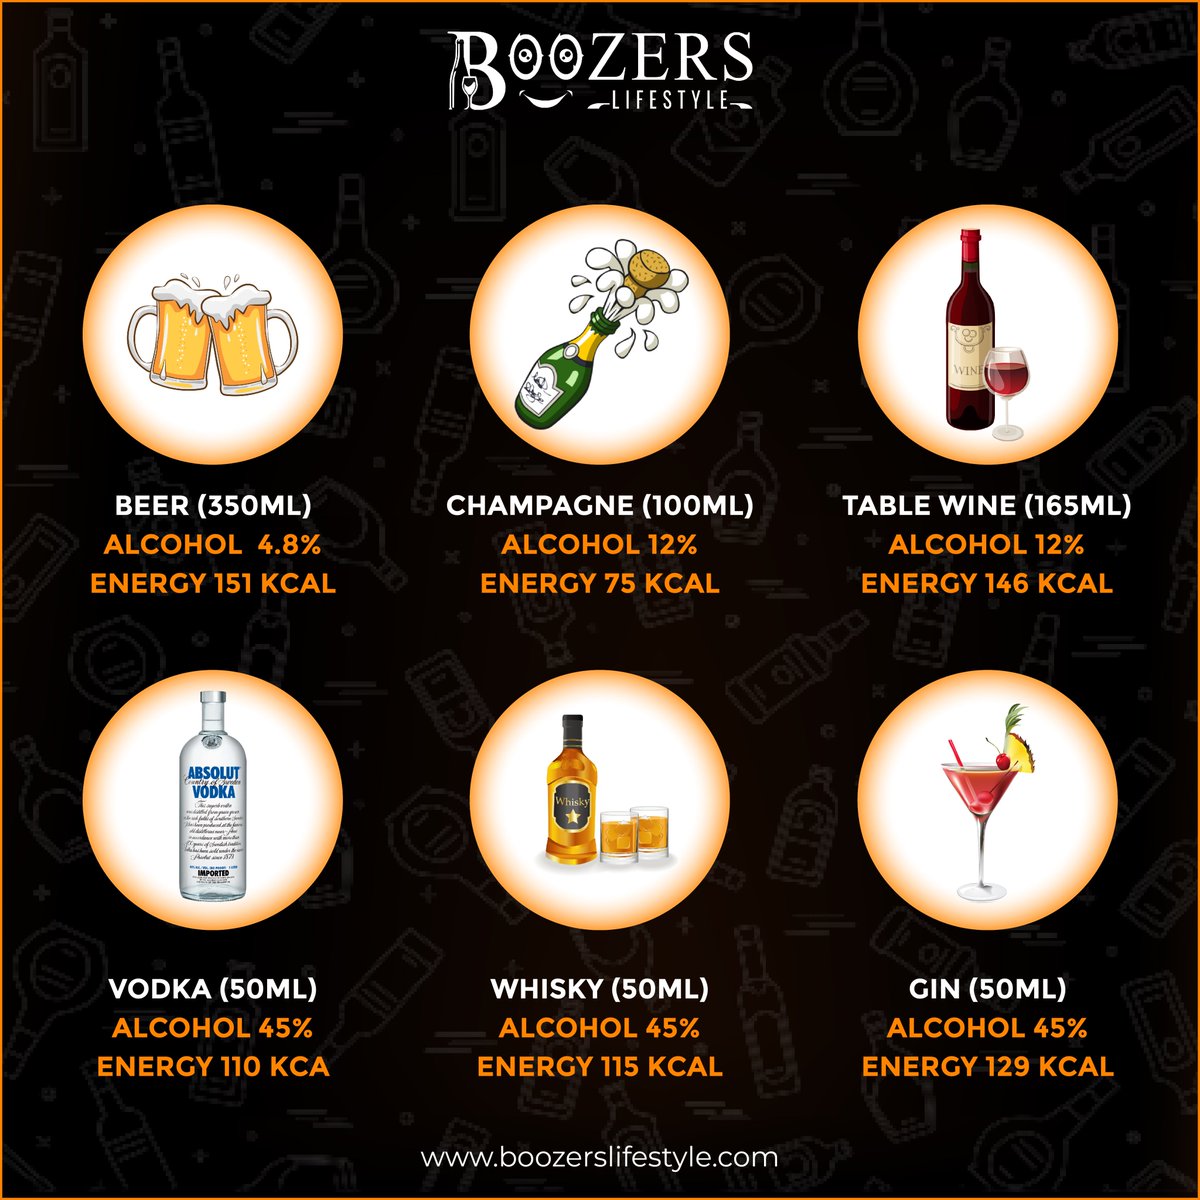 Tag your friend who need instant energy 🍻

#beer #whiskey #beerlover #whiskey #alcohol #whiskeycocktails #bestwhisky #responsibledrinking #liquor #drinkresponsibly #tablewine #vodka #gin #whiskeycollection #alcohollover #drinkaware #drinkless #boozerslifestyle